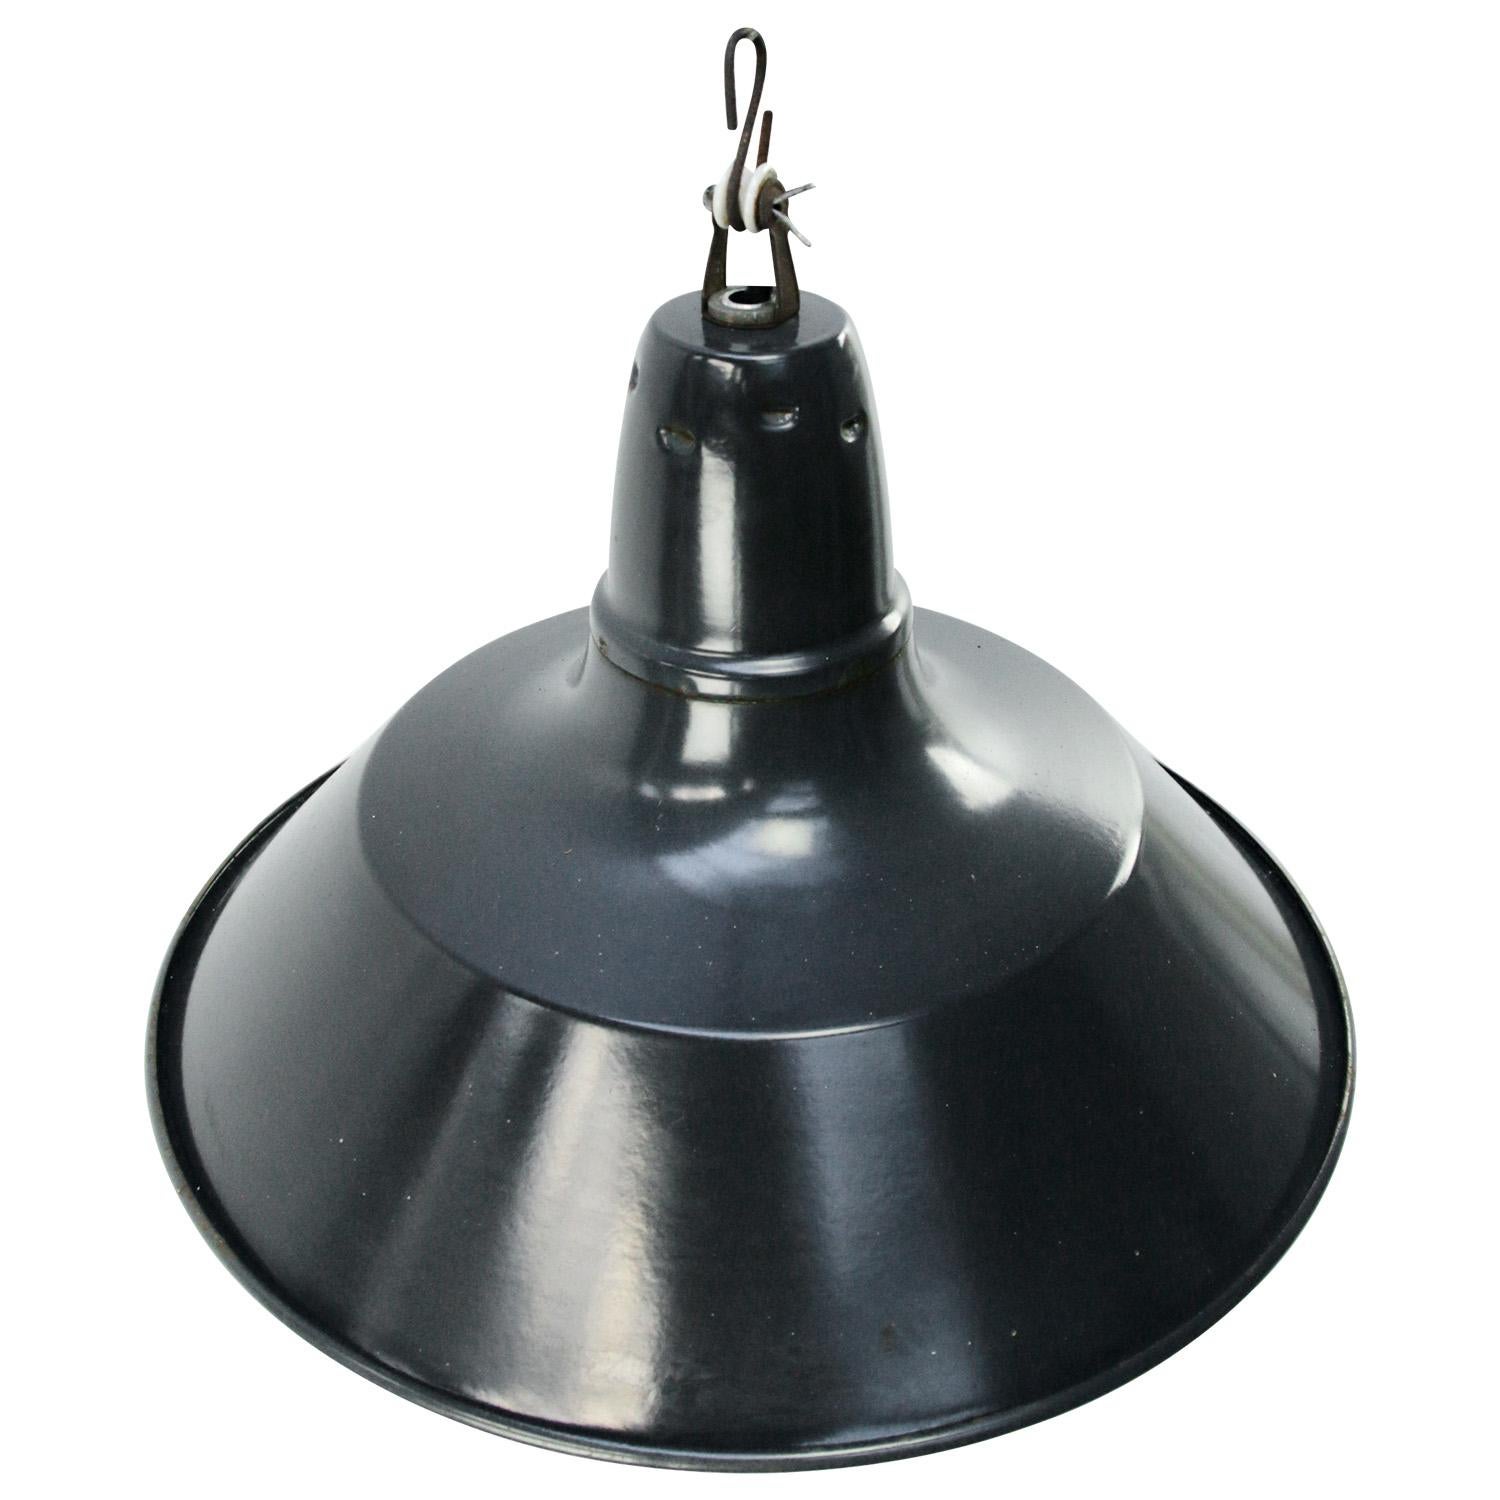 French black / blue industrial pendant lamp.
Used in warehouses and factories in France and Belgium.

Weight: 1.30 kg / 2.9 lb

Priced per individual item. All lamps have been made suitable by international standards for incandescent light bulbs,